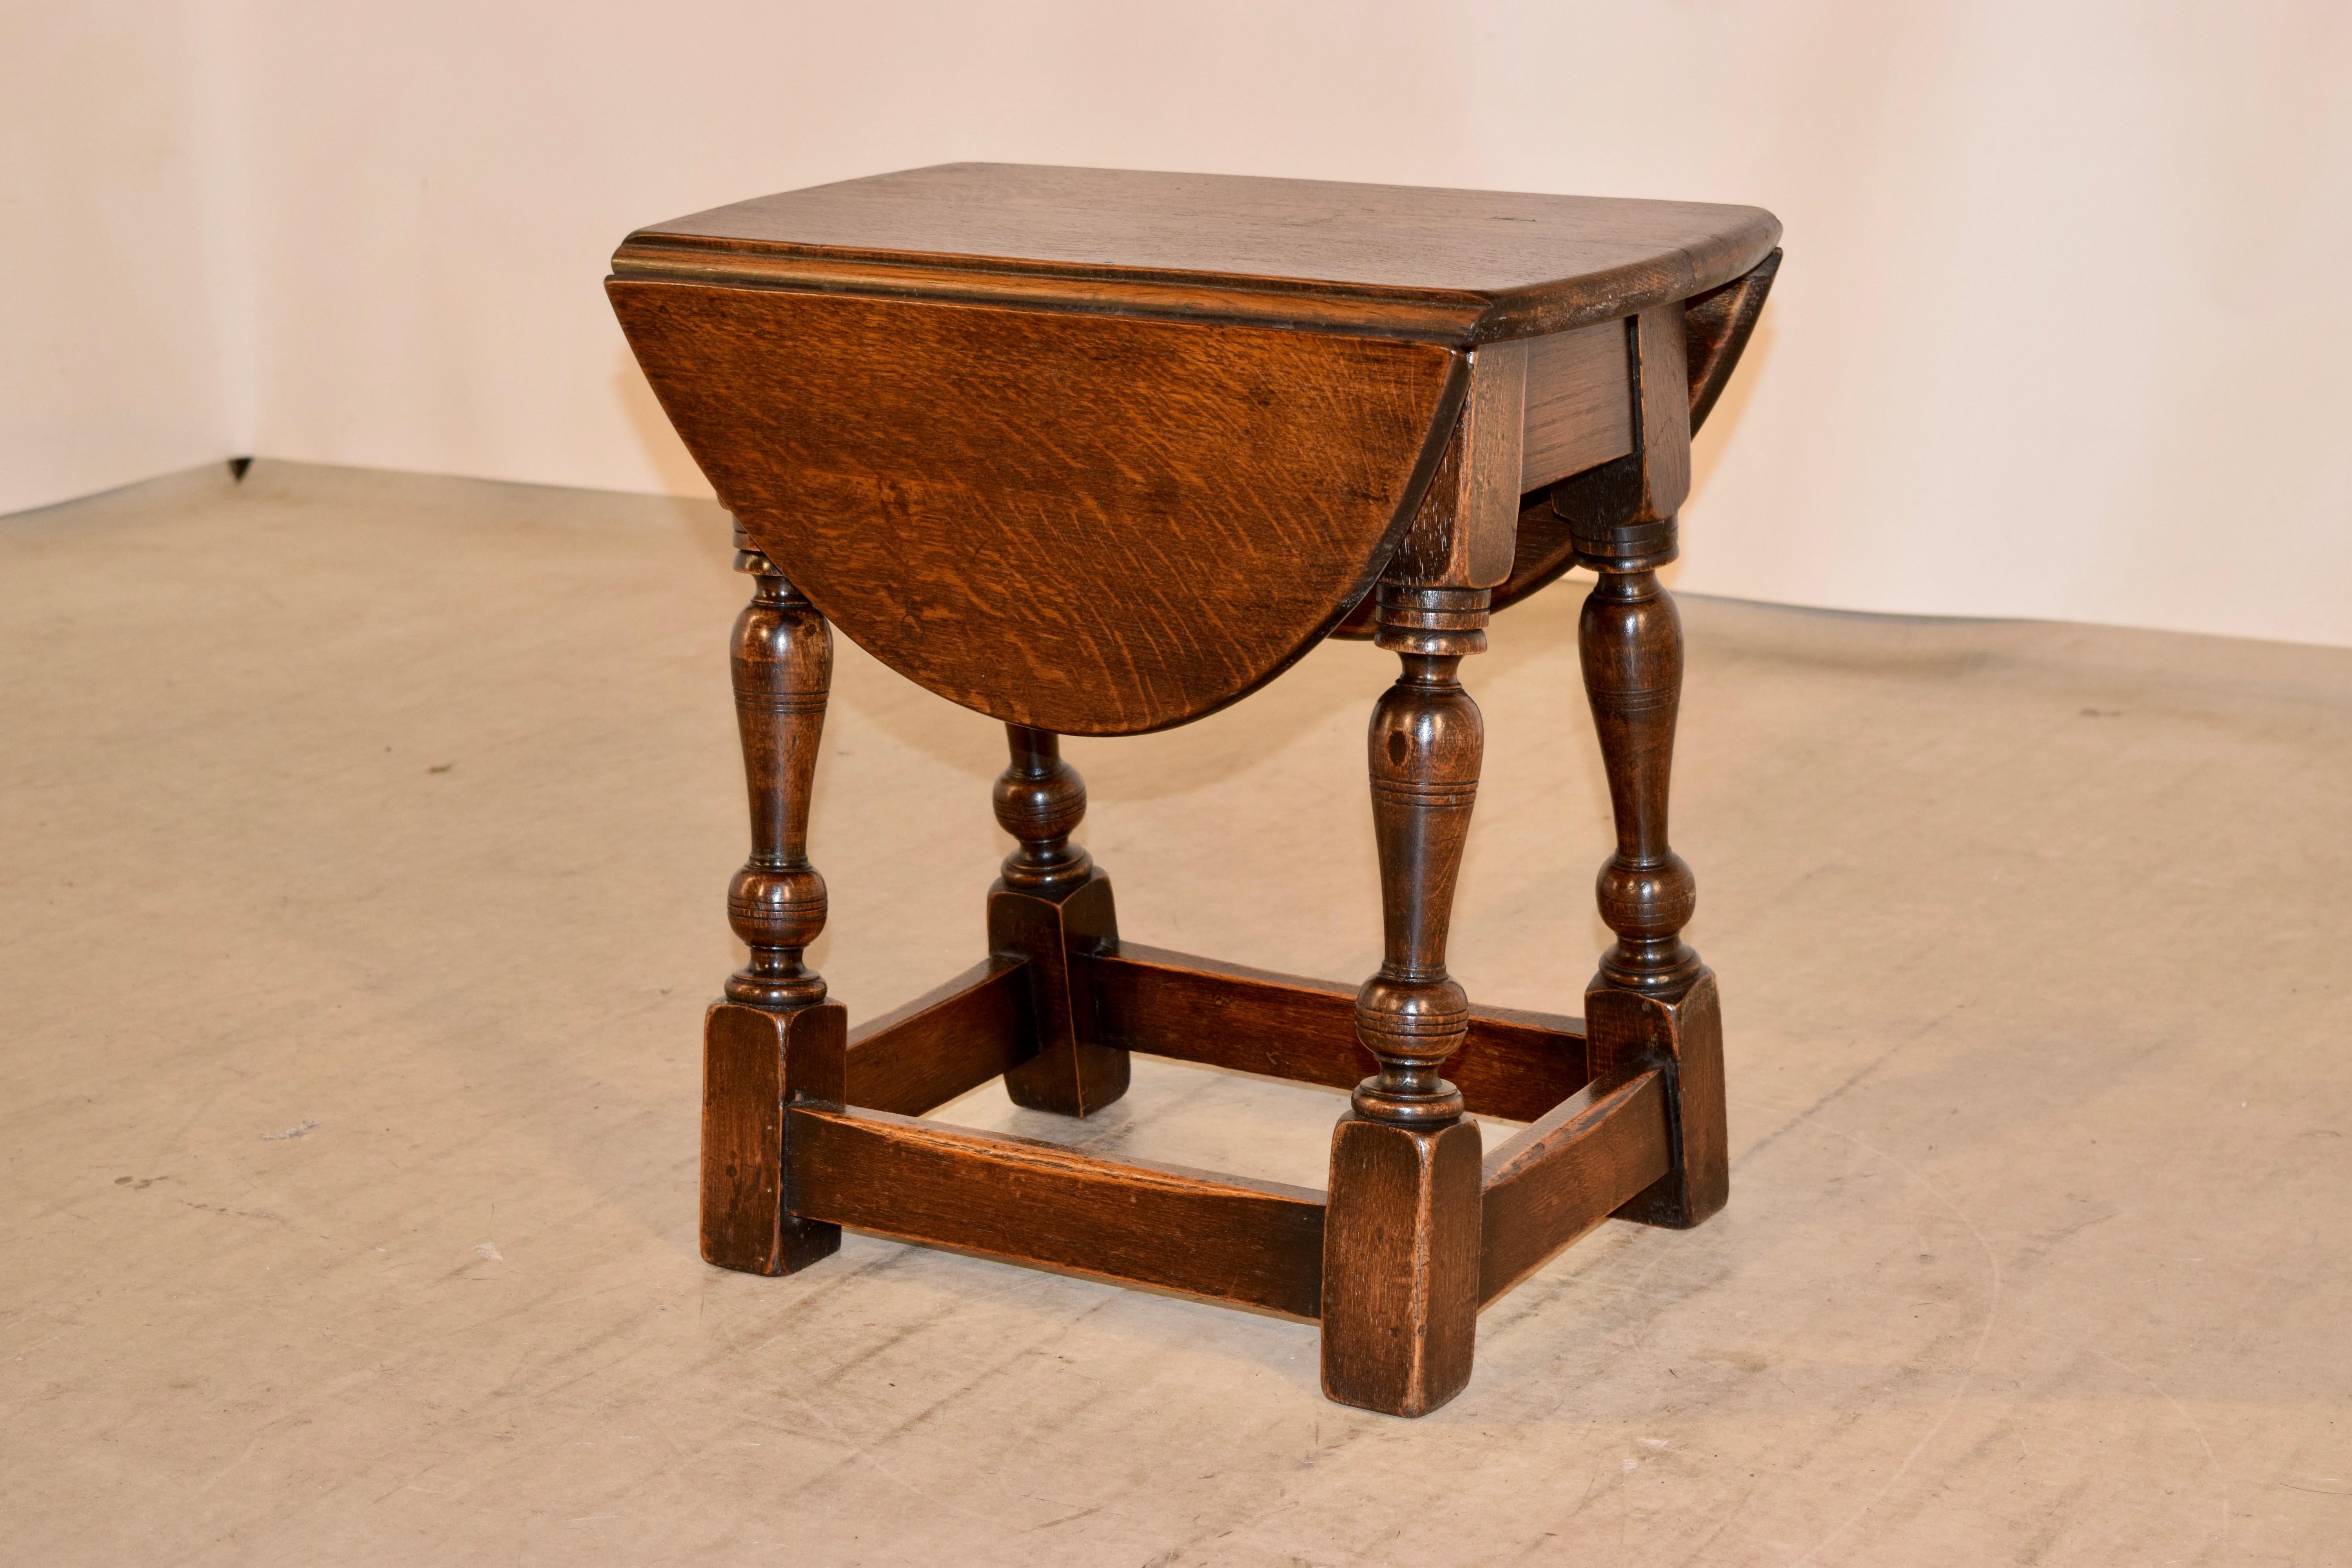 Victorian 19th Century Small Drop-Leaf Table